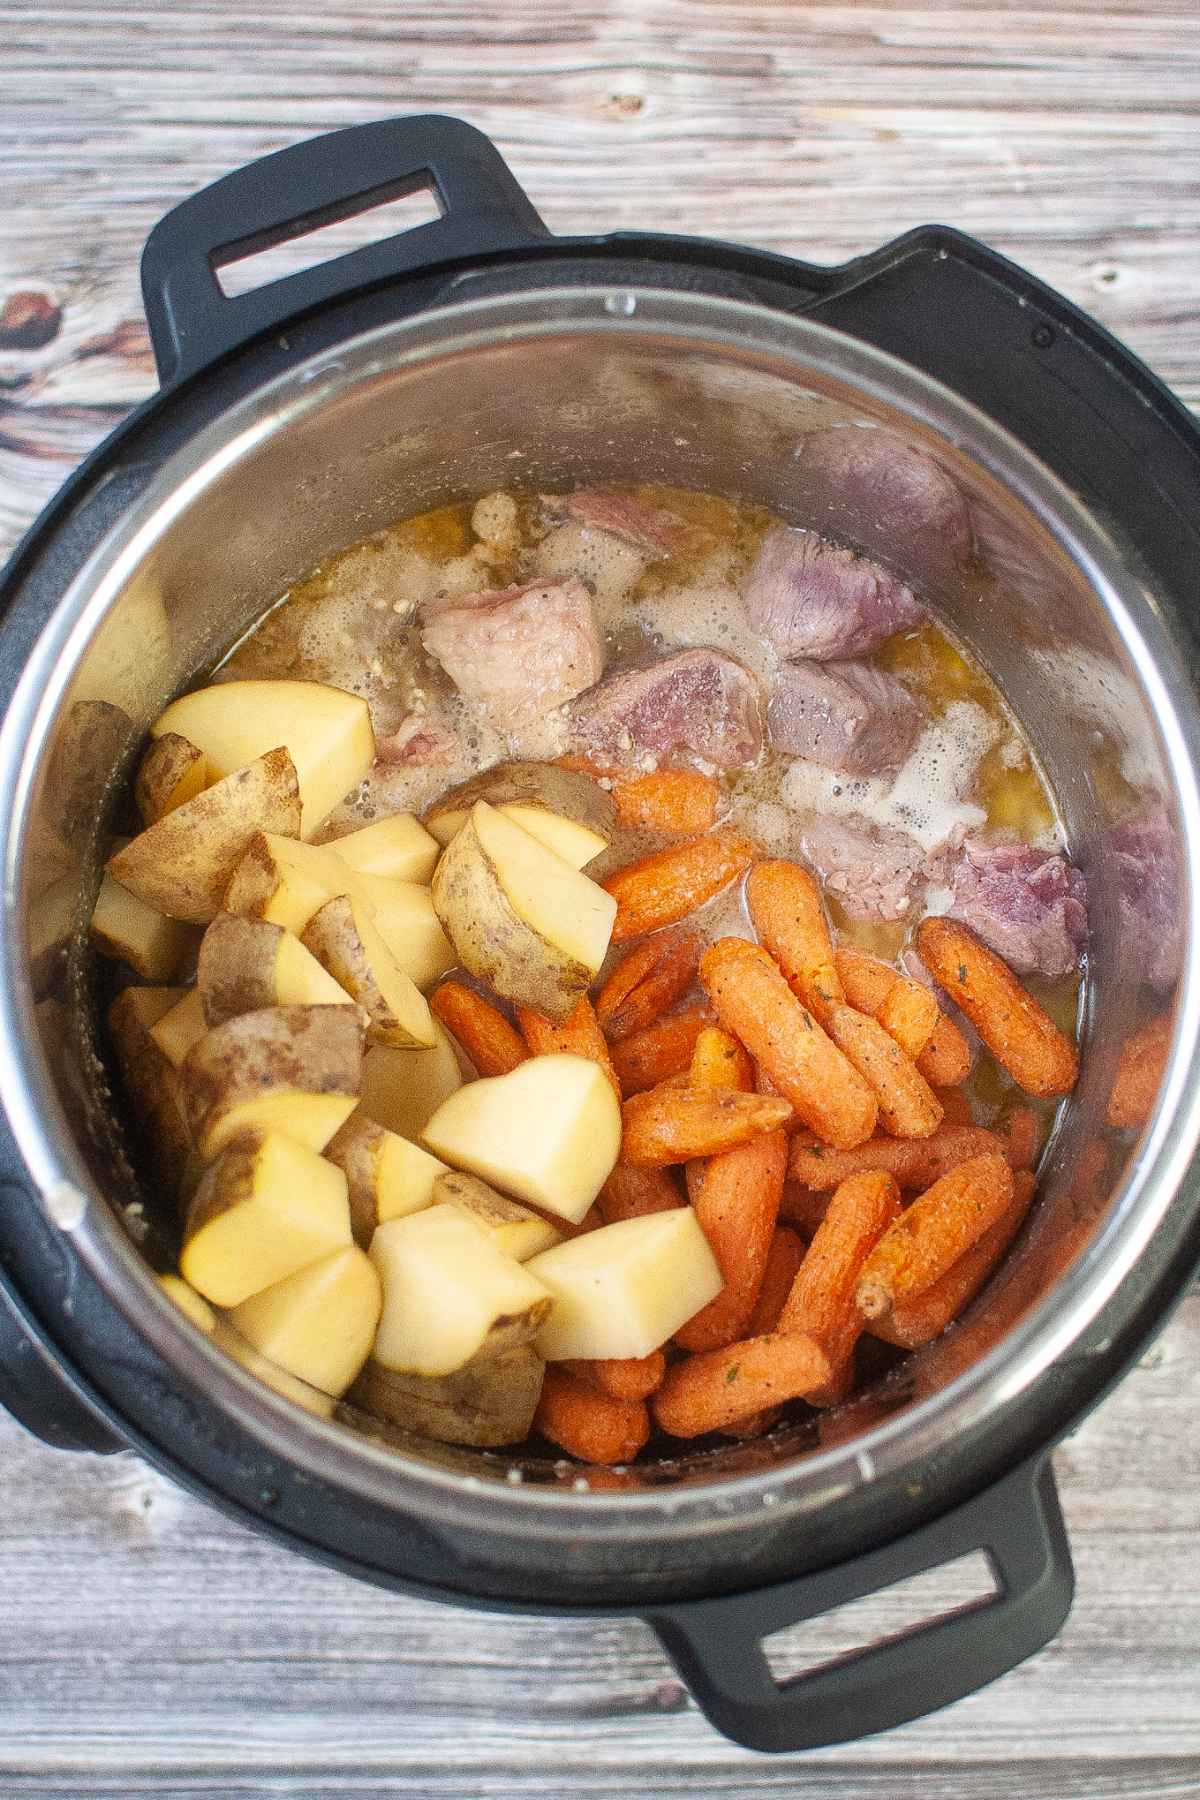 All of the roast ingredients in the instant pot.